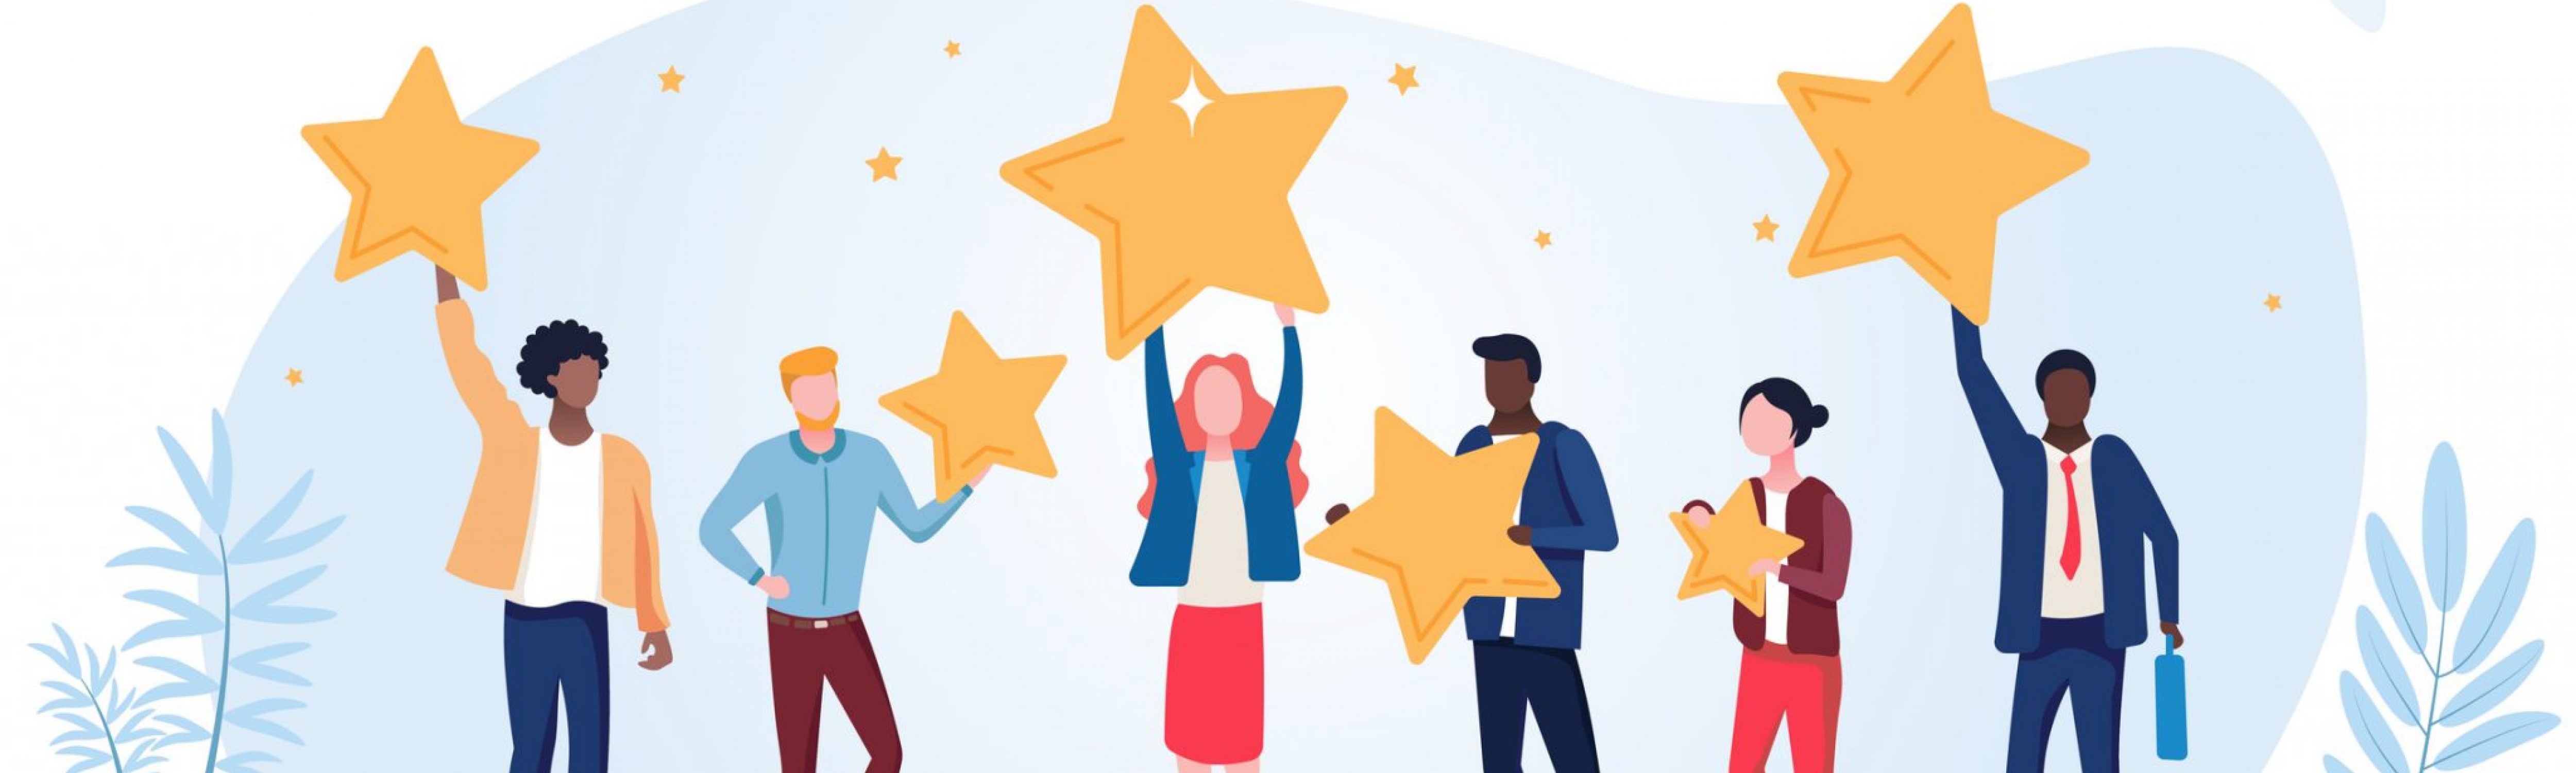 A team achieving gold stars. Business Impact article image for how to make your brand likeable and increase your sales.